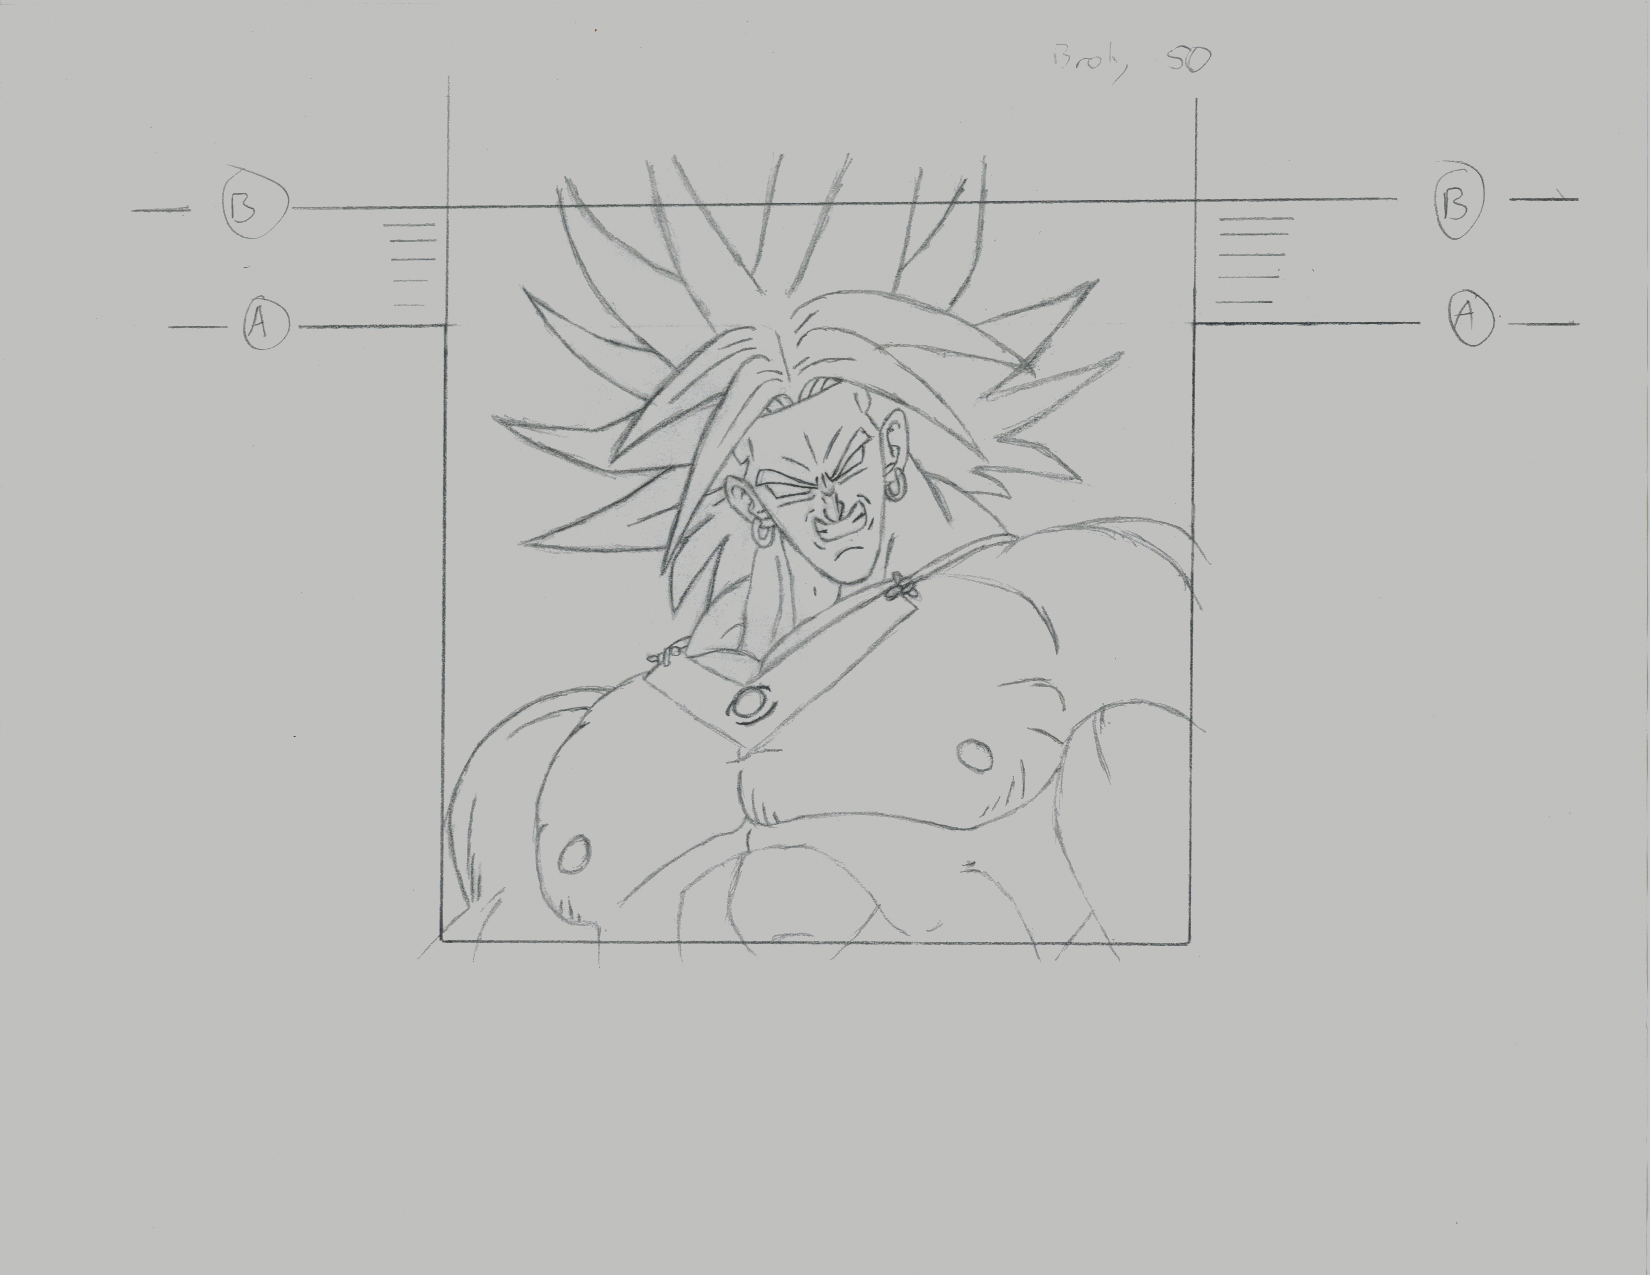 Broly Sketch by Madcap888